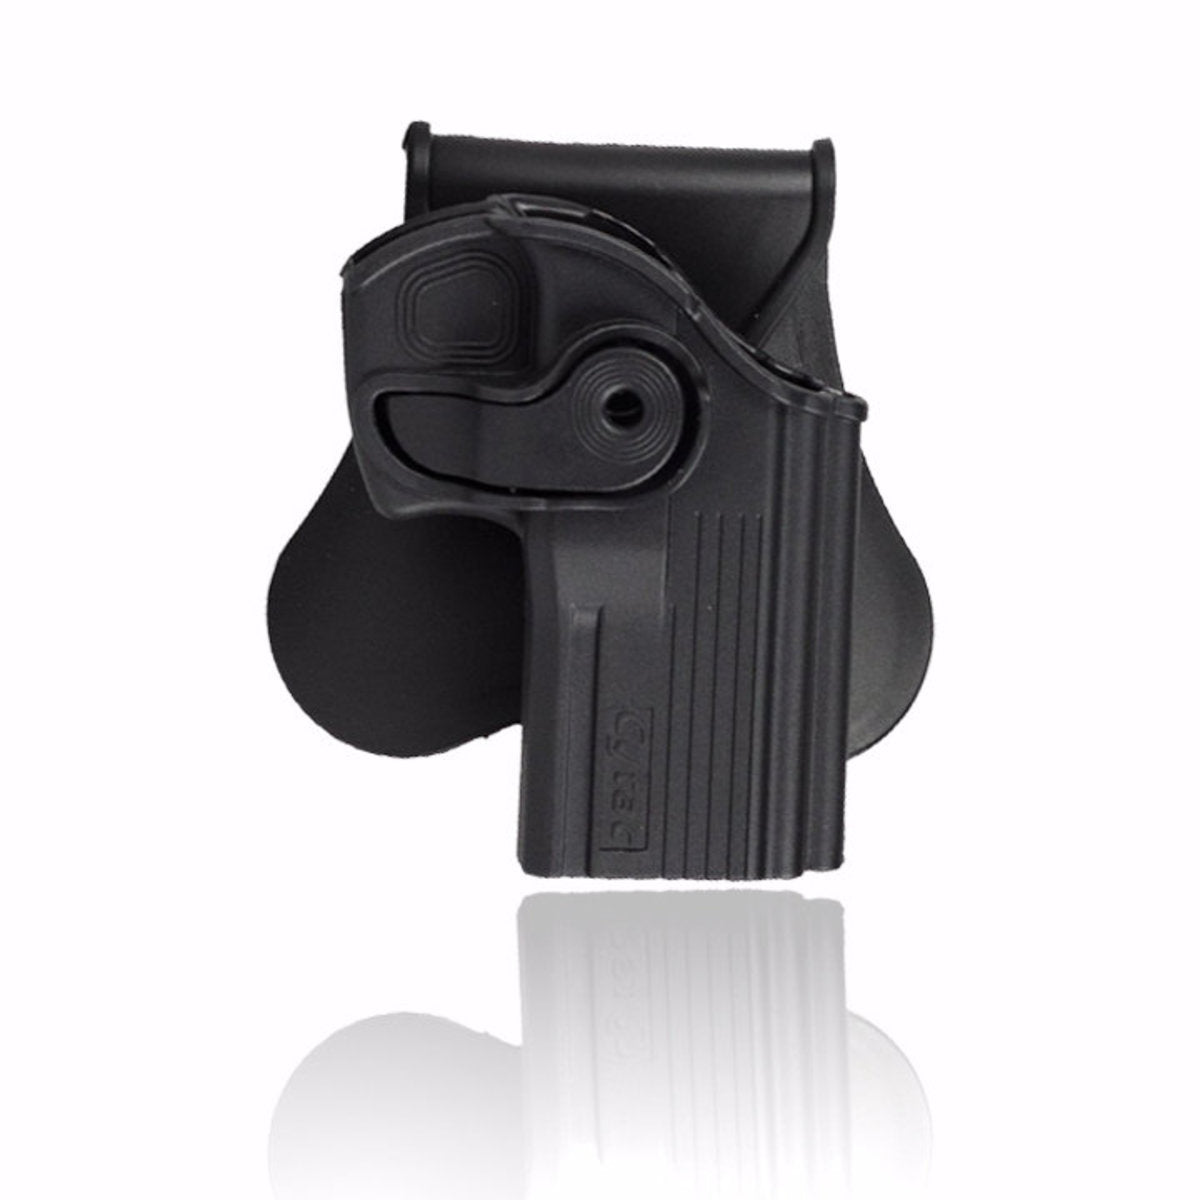  Game Face SAH04 Airsoft Leg Holster With CO2 Pouch, Black : Airsoft  Holsters : Sports & Outdoors